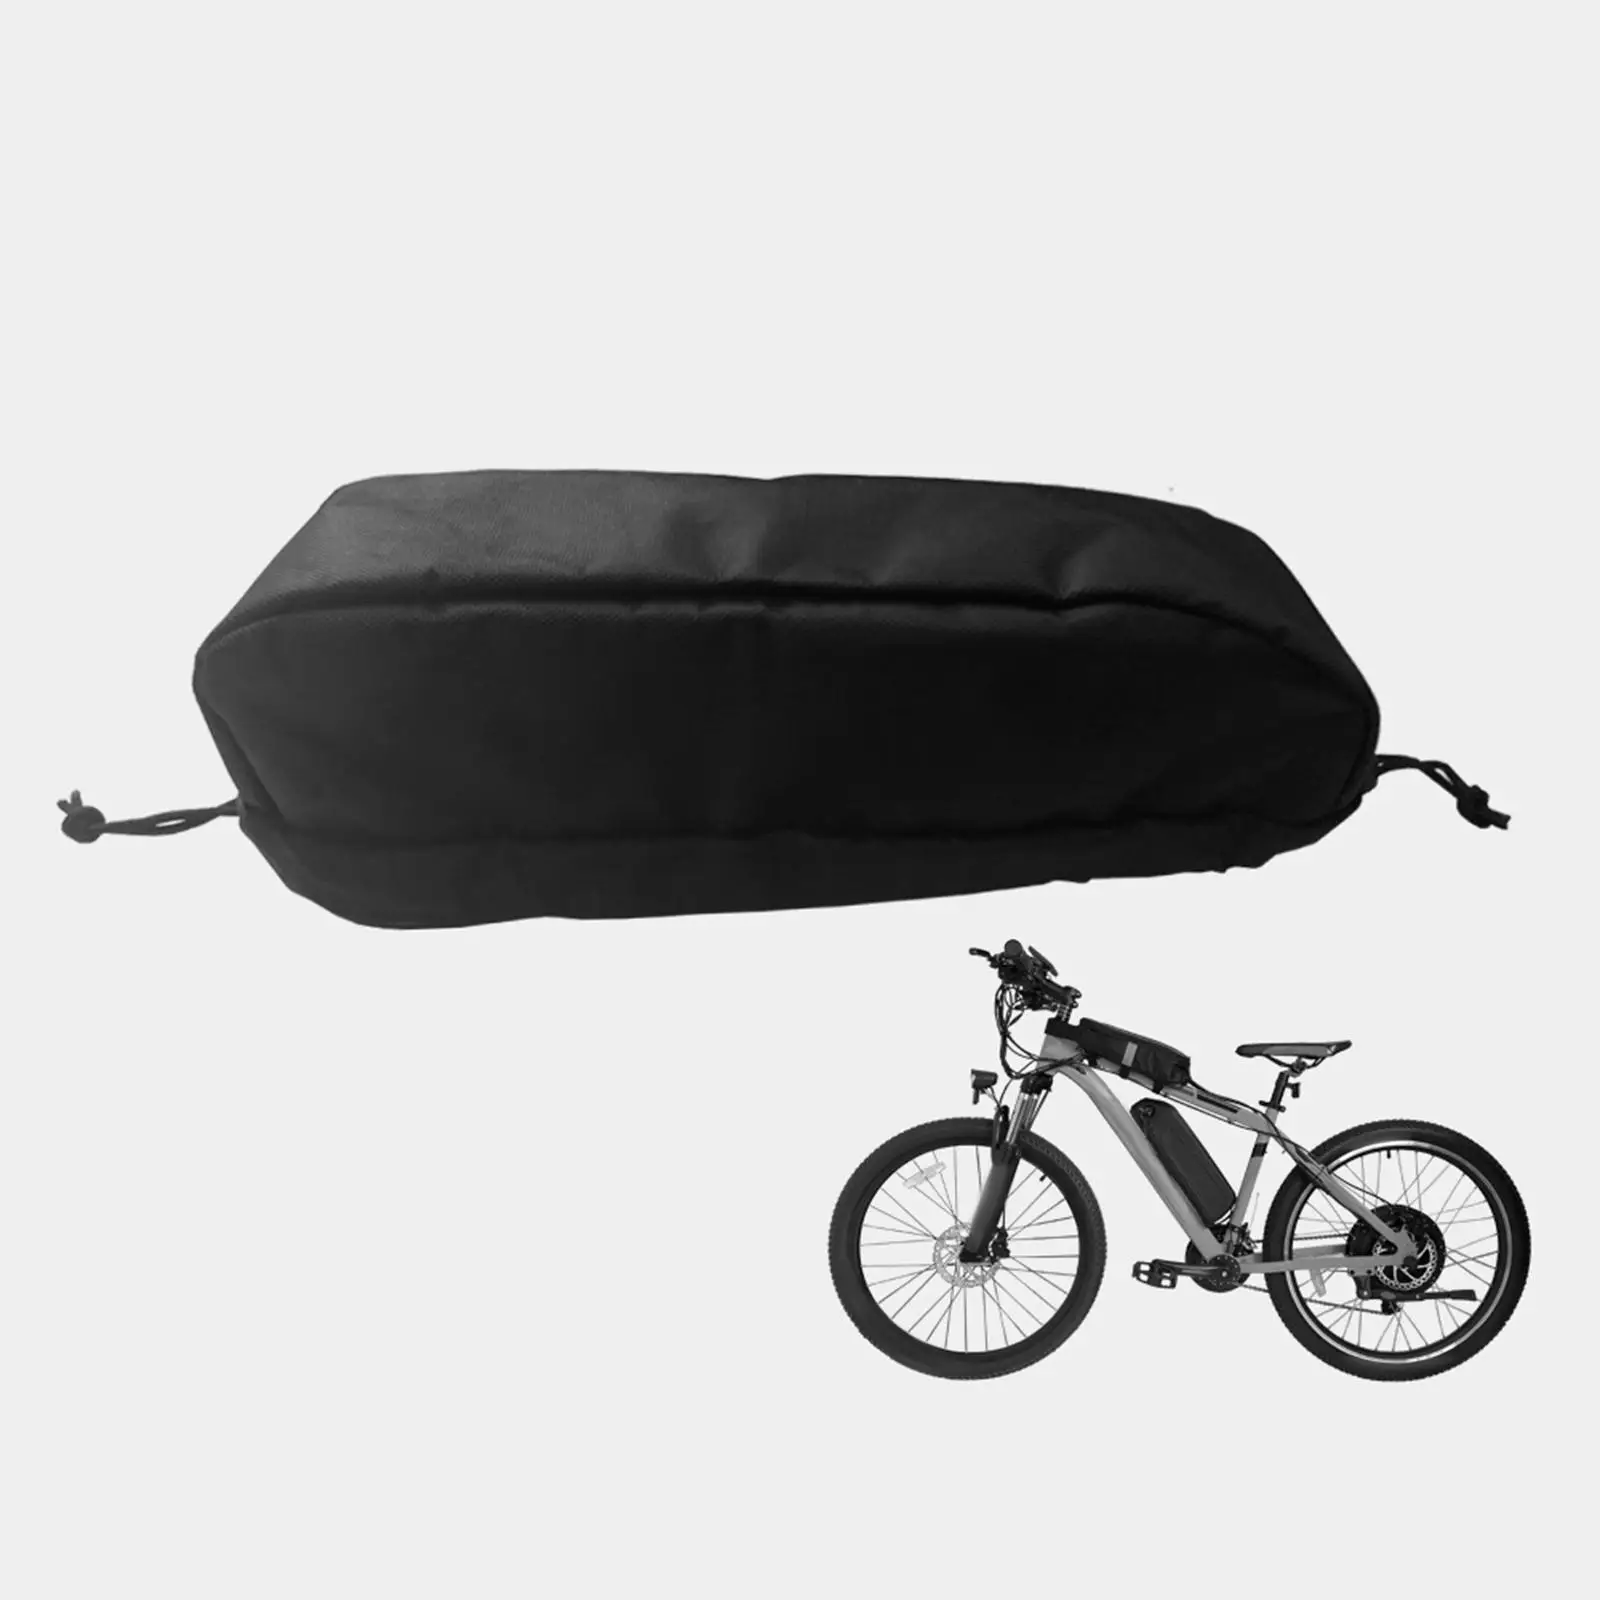 Dustproof Battery Protect Cover Accessories Portable Wear Resistant Weather Protection Frame Cover for Electric Bicycle Outdoor